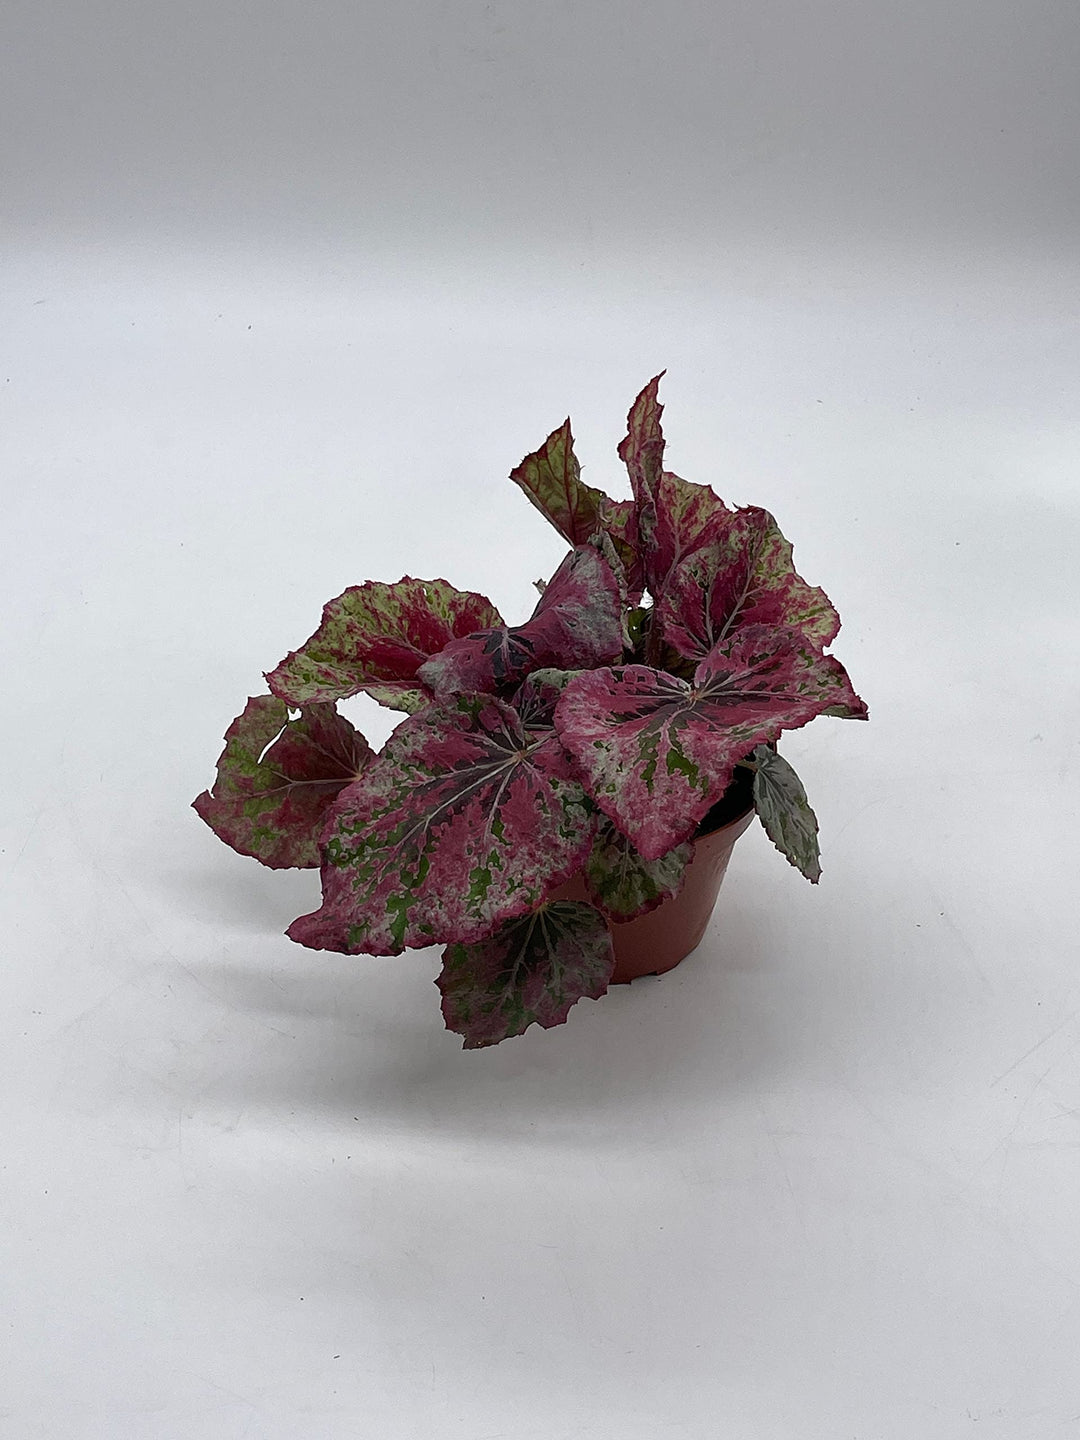 Venetian Red, Begonia Rex, 4 inch, Painted-Leaf Begonia, Unique Homegrown Exclusive